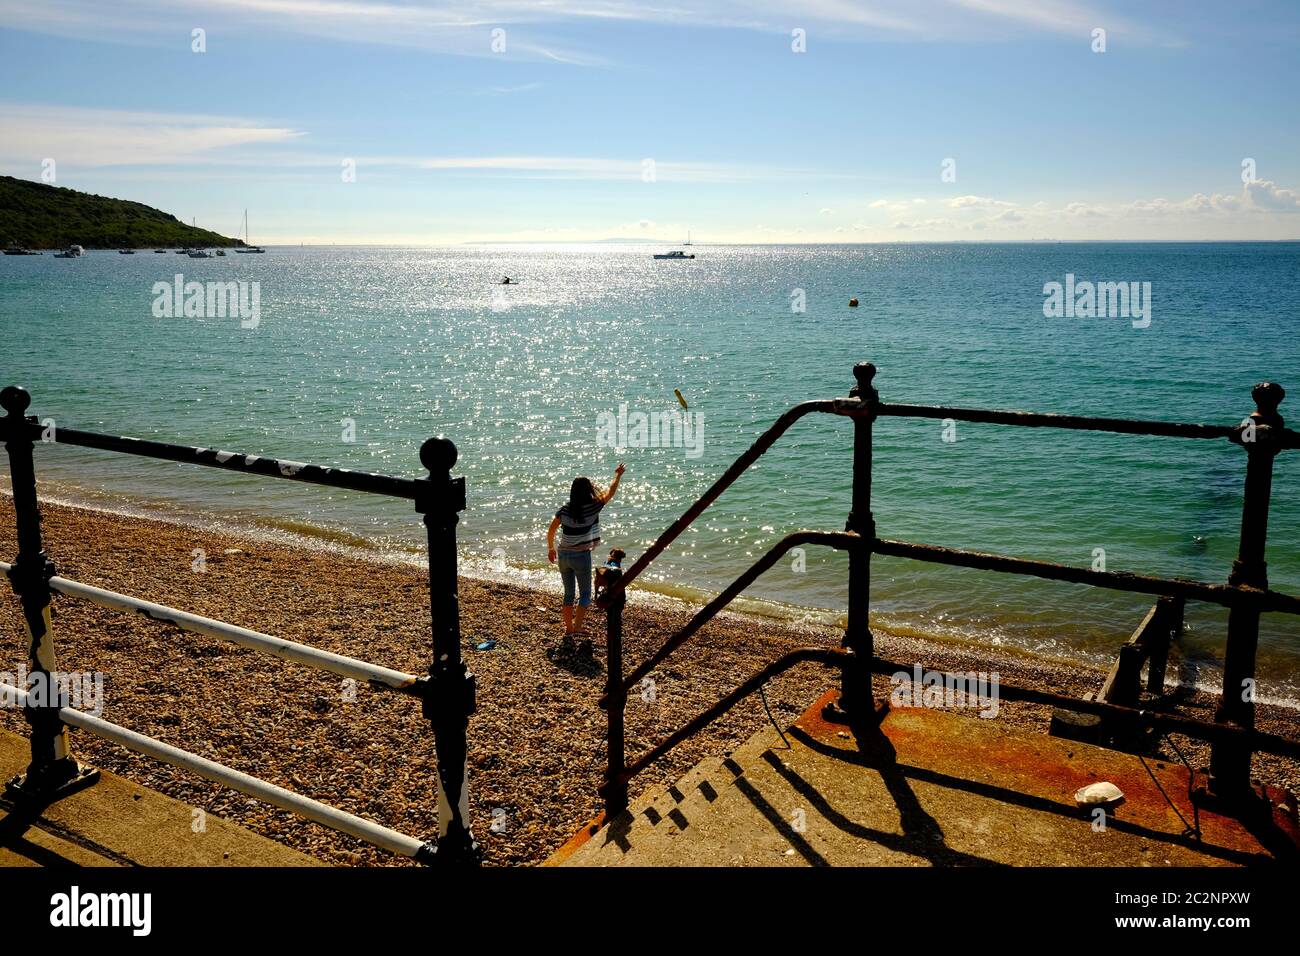 Throwing a stick for the dog into the sea from the beach shoreline on Totland Bay Isle of Wight Stock Photo